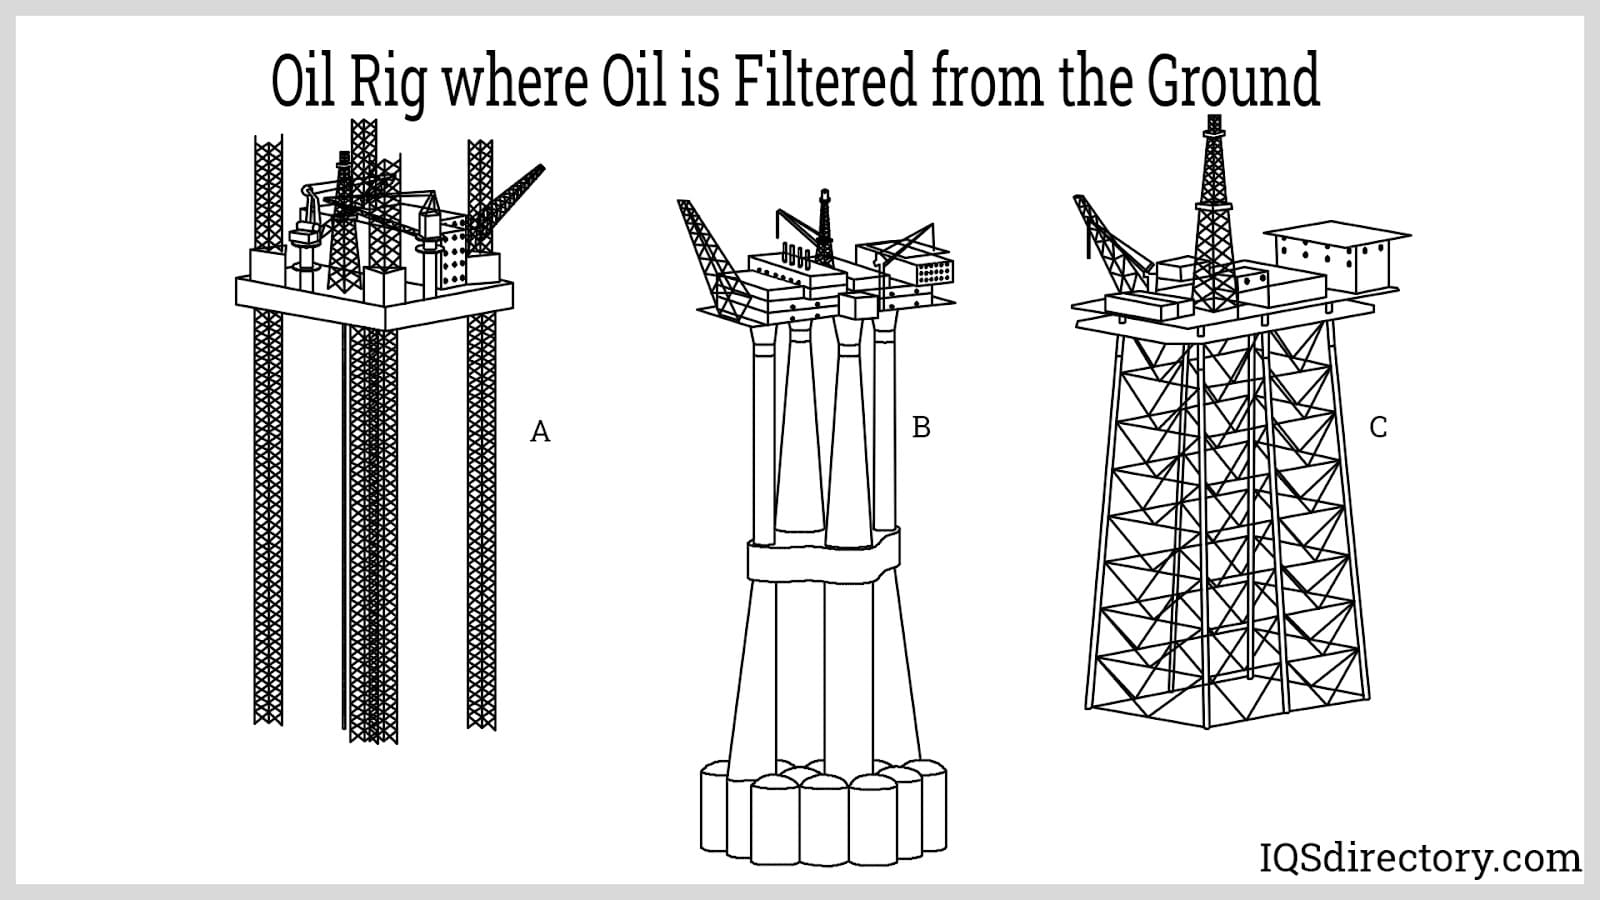 Oil Rig where Oil is Filtered from the Ground